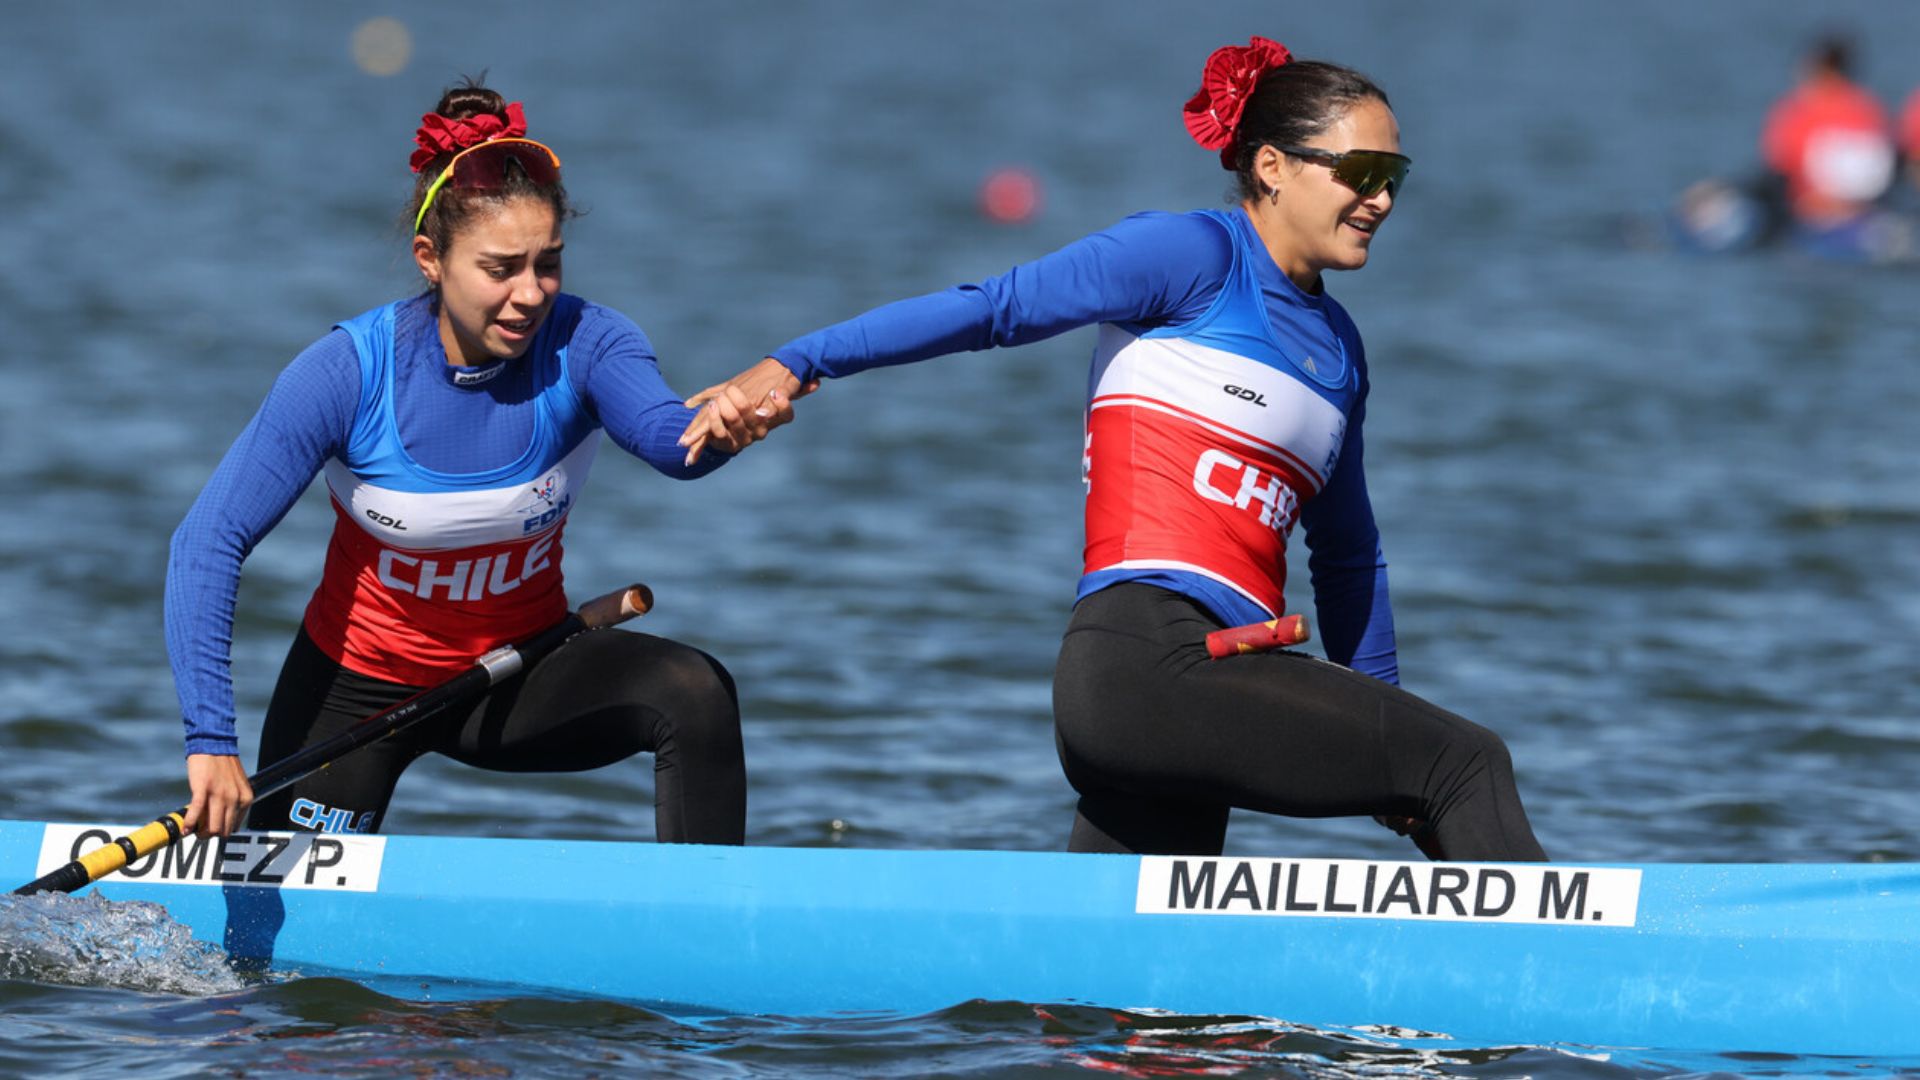 Cote Mailliard and Paula Gómez Settle for Silver After an Incredible Photo Finis